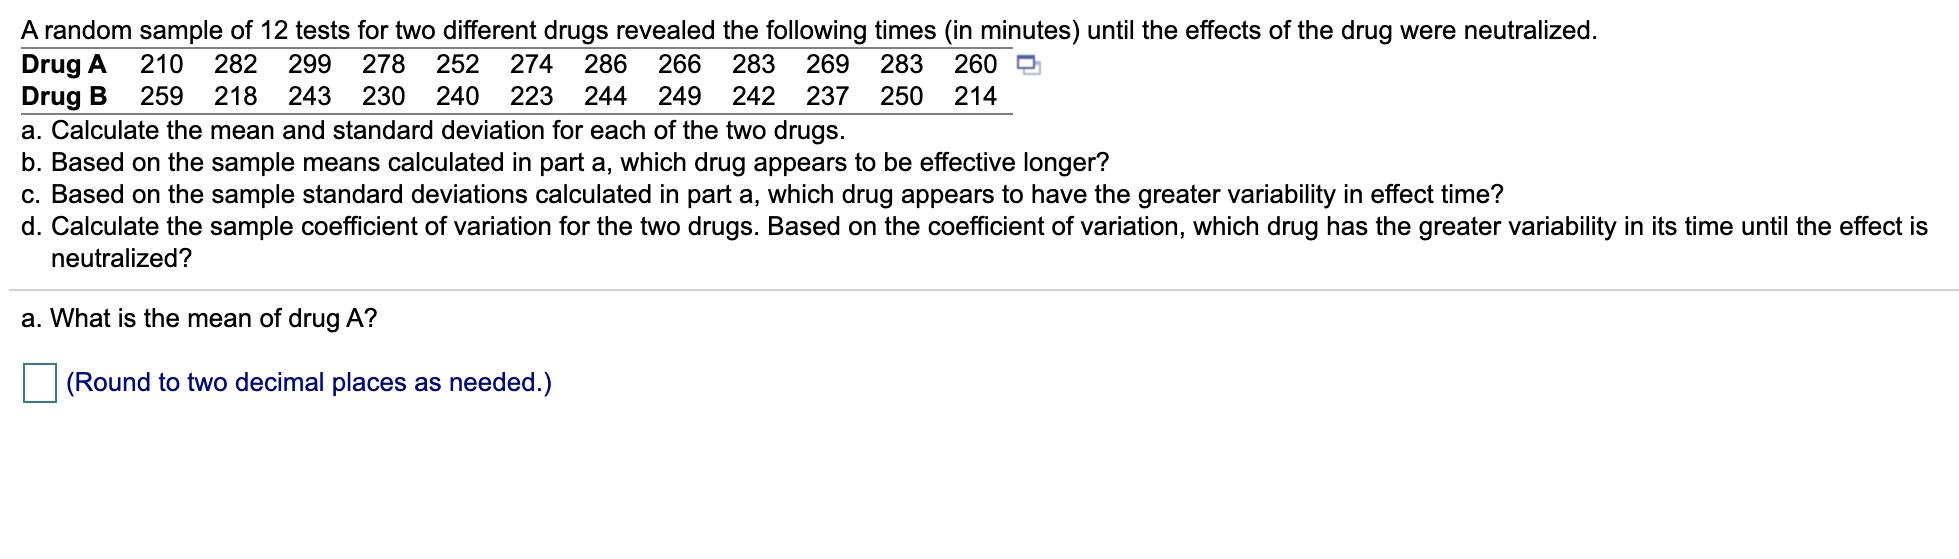 A random sample of 12 tests for two different drugs revealed the following times (in minutes) until the effects of the drug w